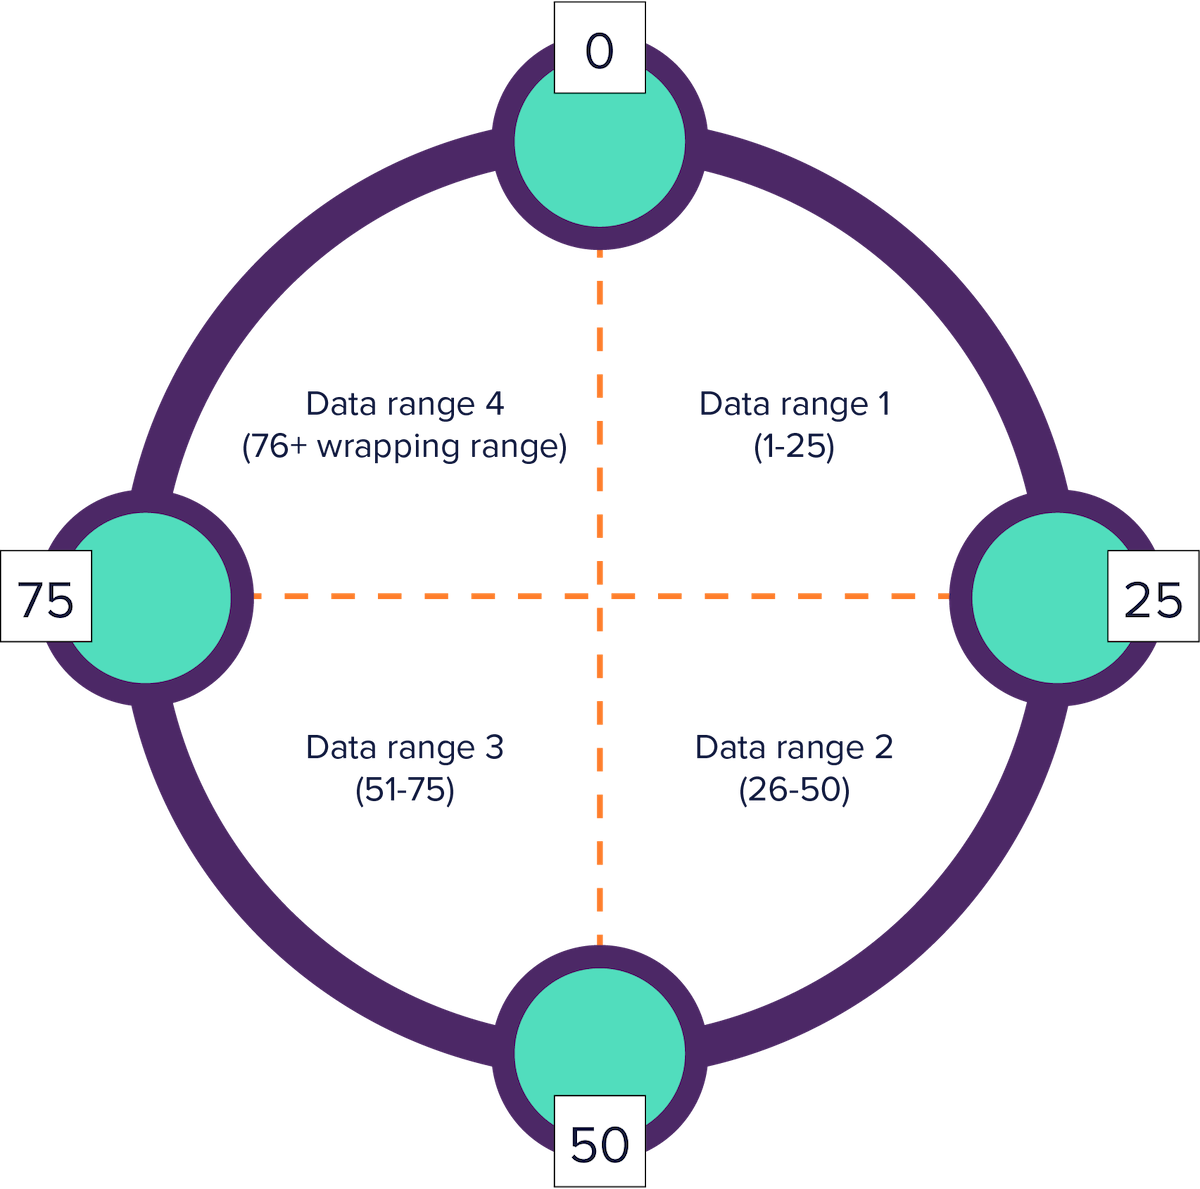 A large circle divided into four quadrants to represent a cluster with evenly distributed token ranges. Four smaller